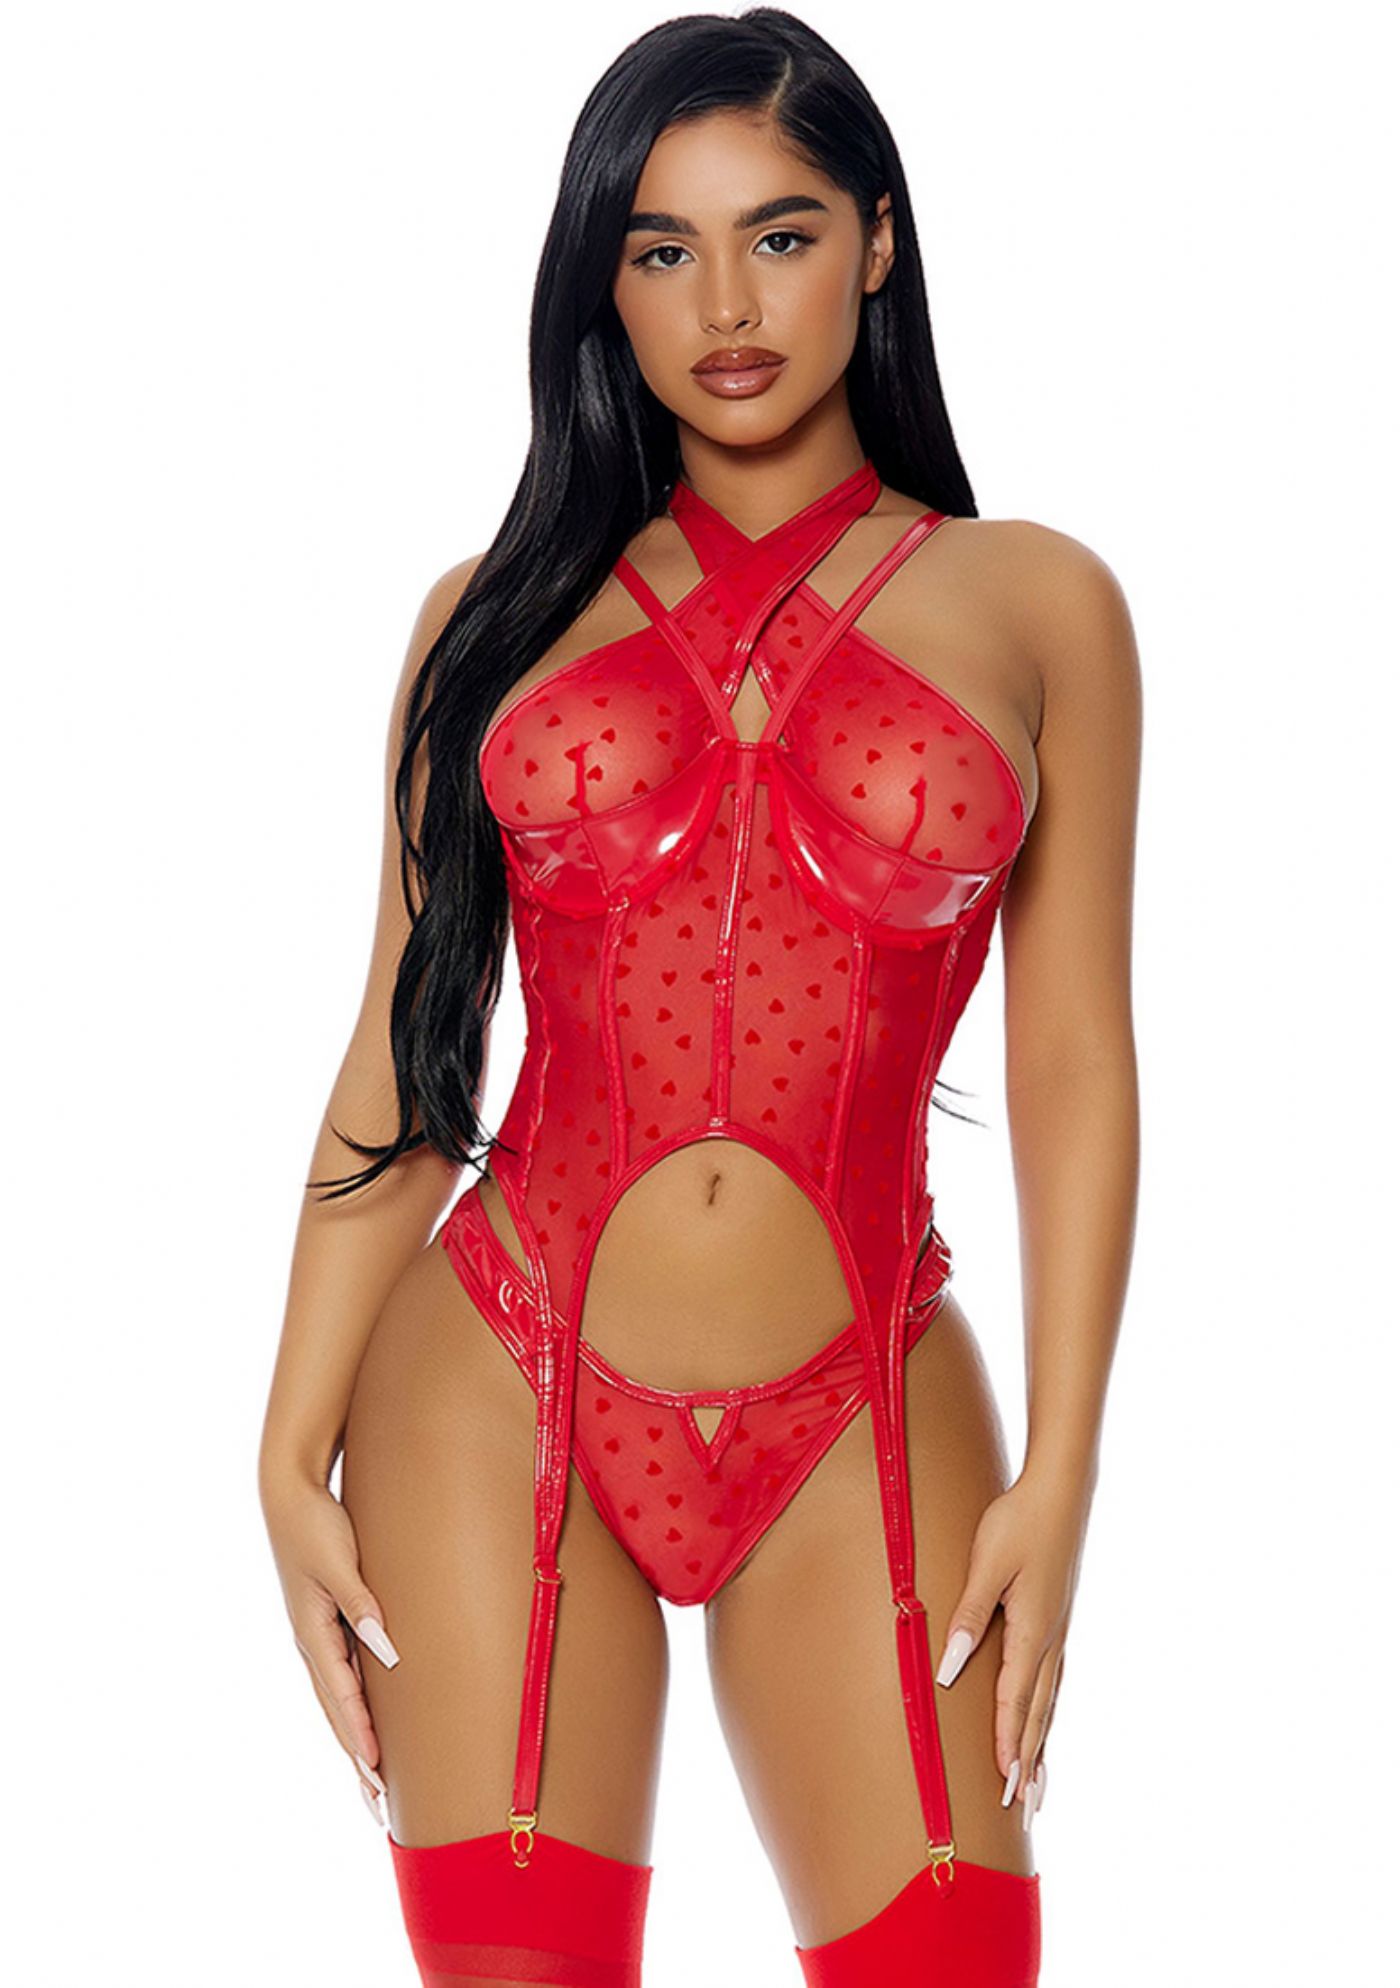 Steal Your Heart - Rd Bustier & Trusse (FP772112)